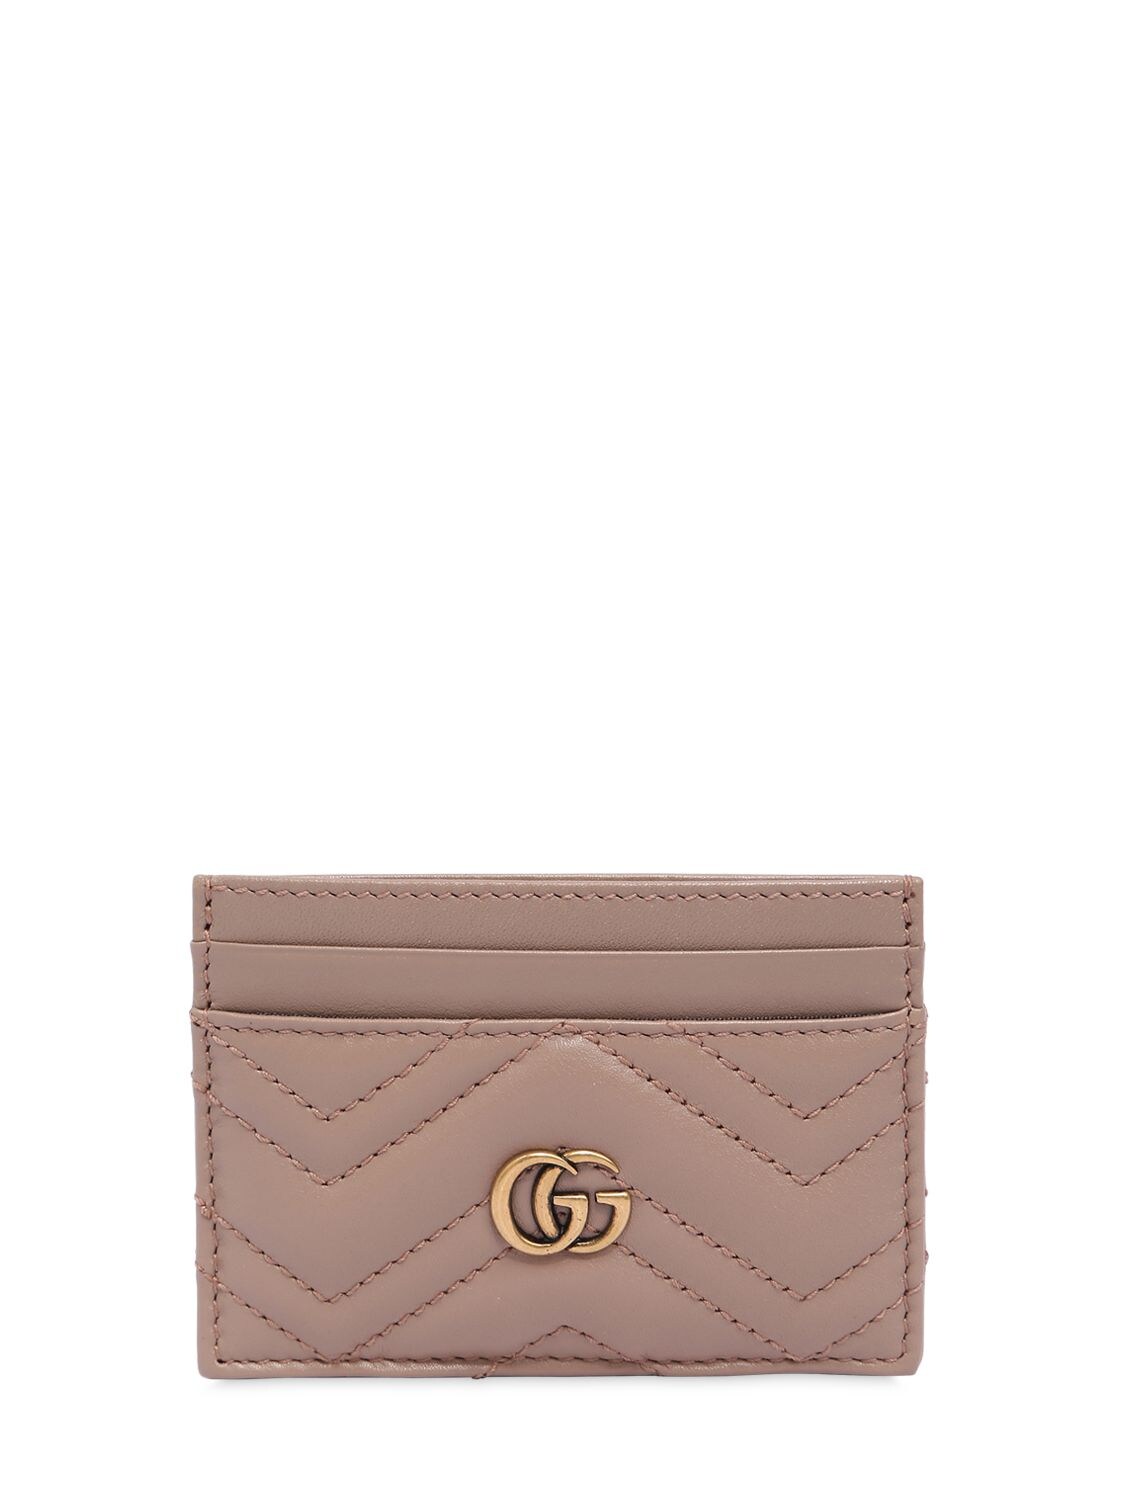 Gucci Gg Marmont Quilted Leather Card Holder In Poudre